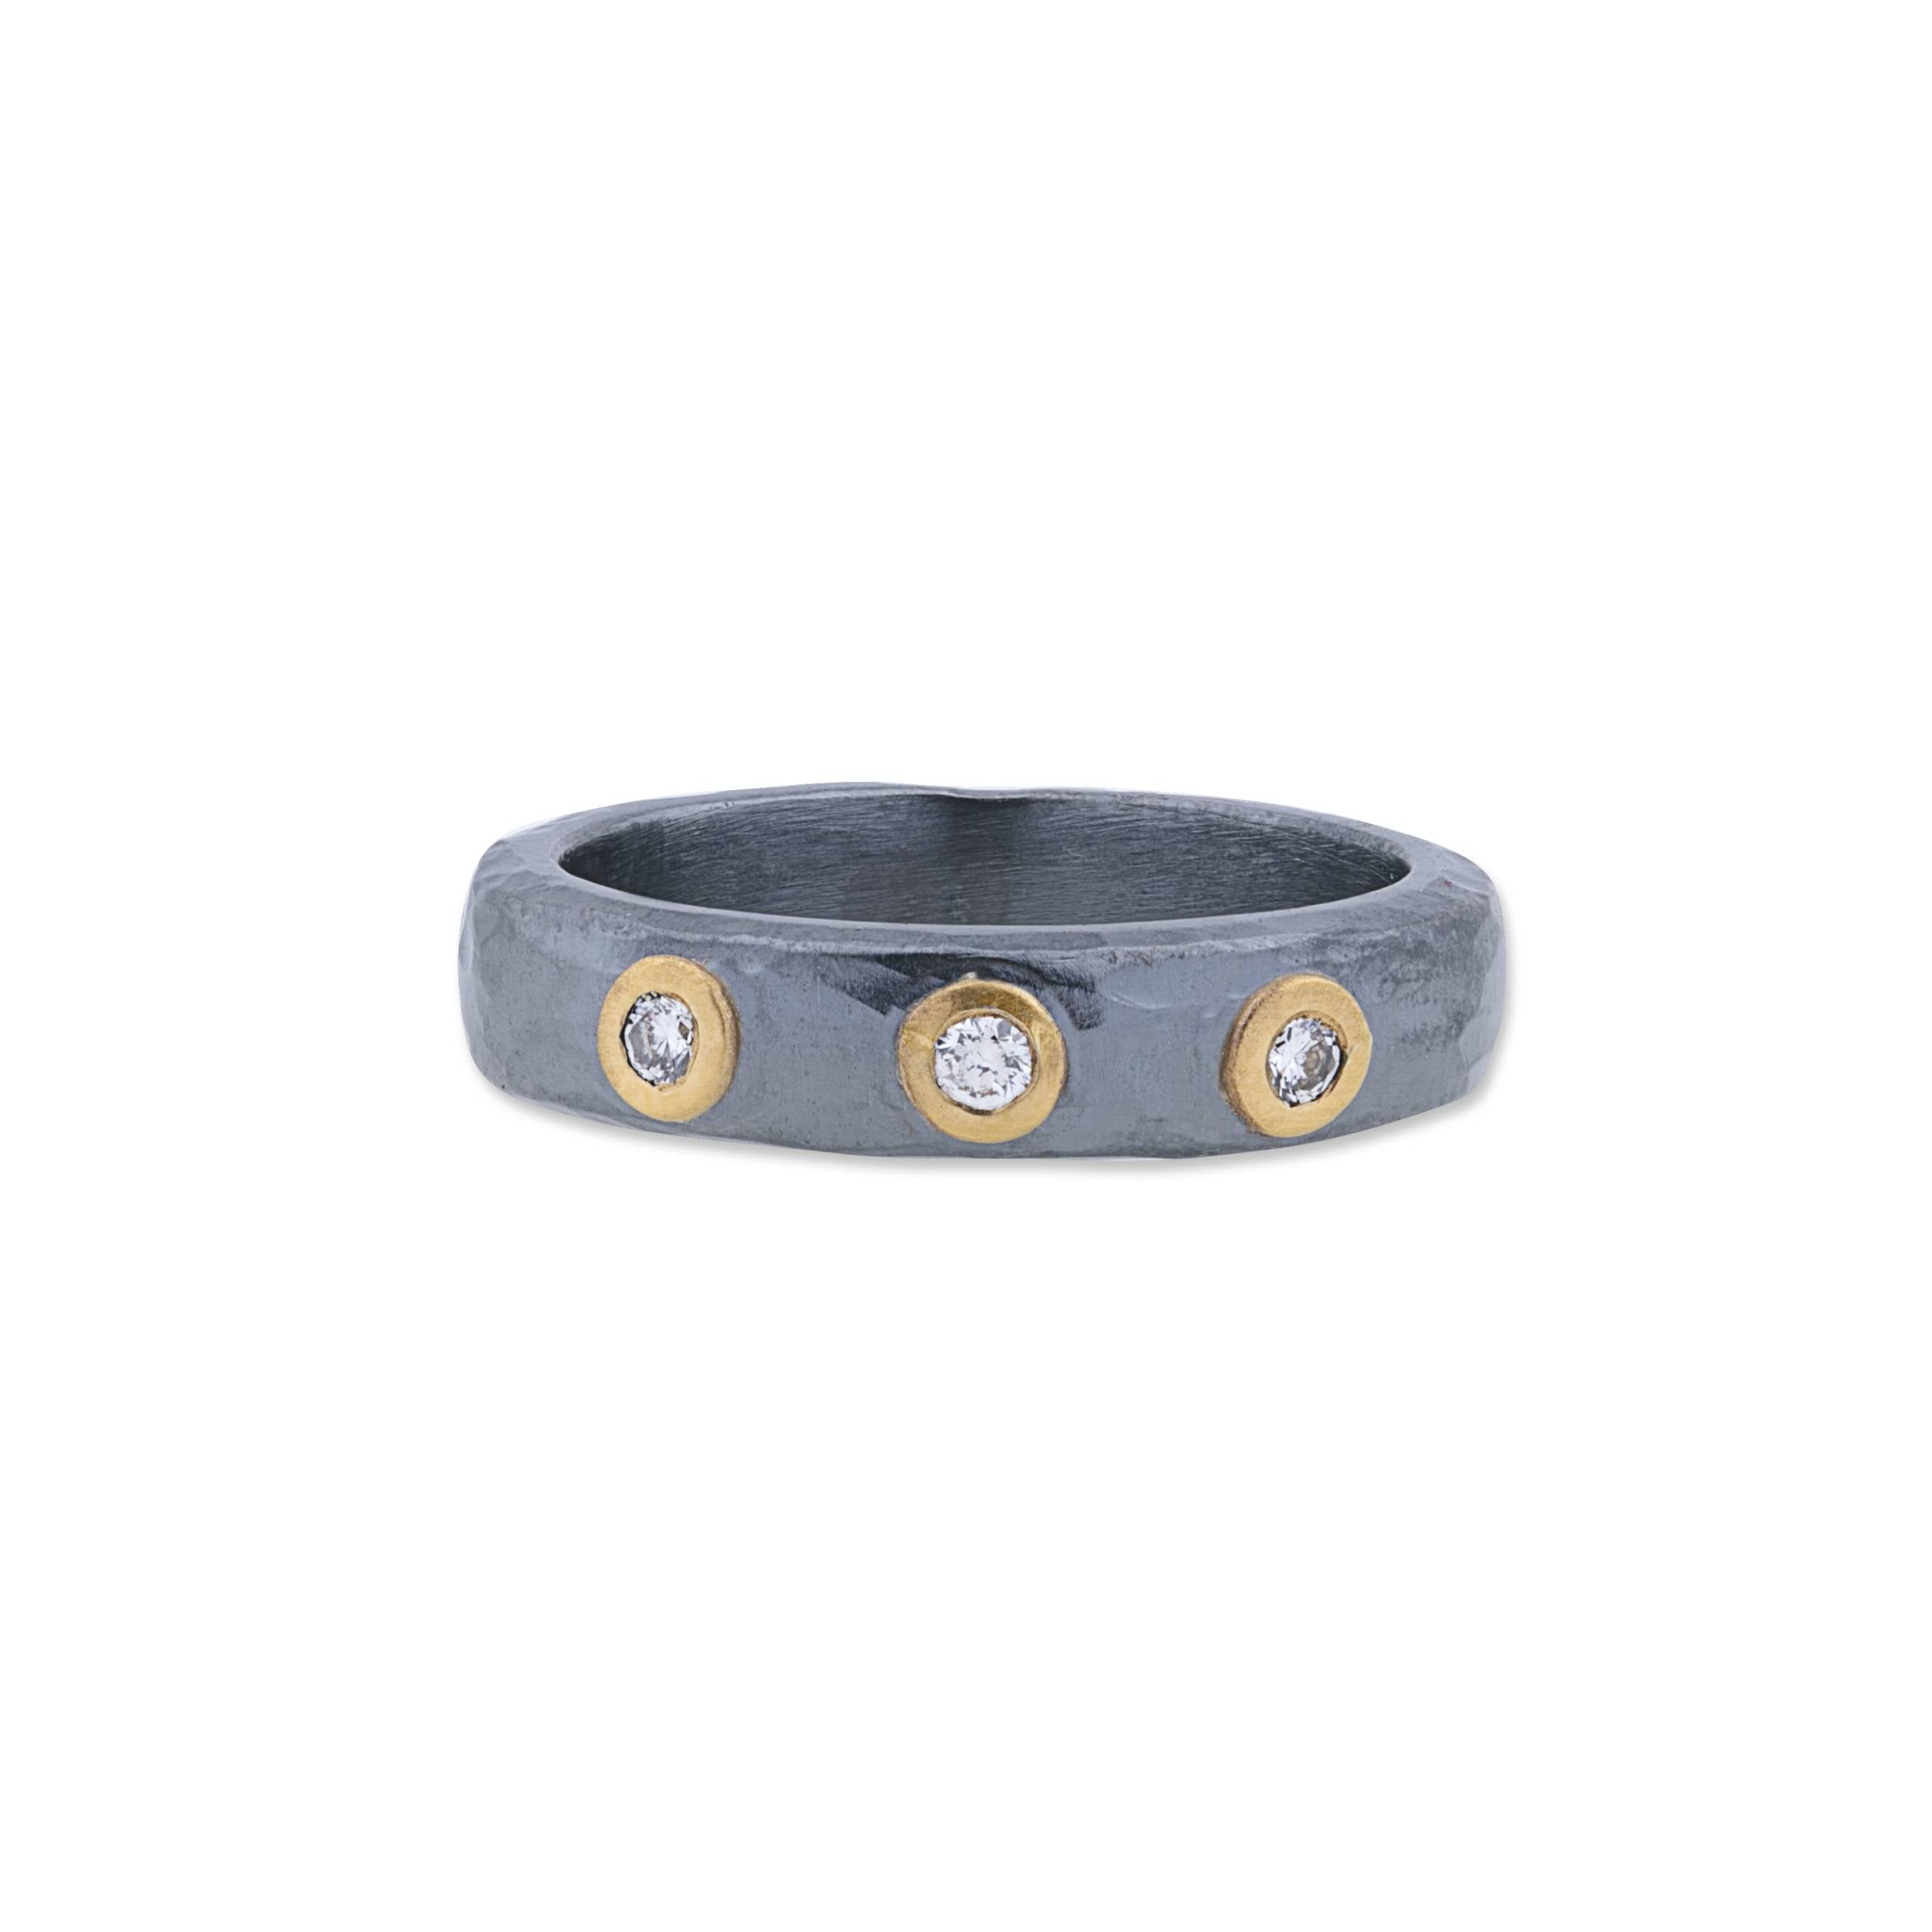 24K Gold & Oxidized Sterling Silver "Stockholm" Ring, With 3 Diamonds